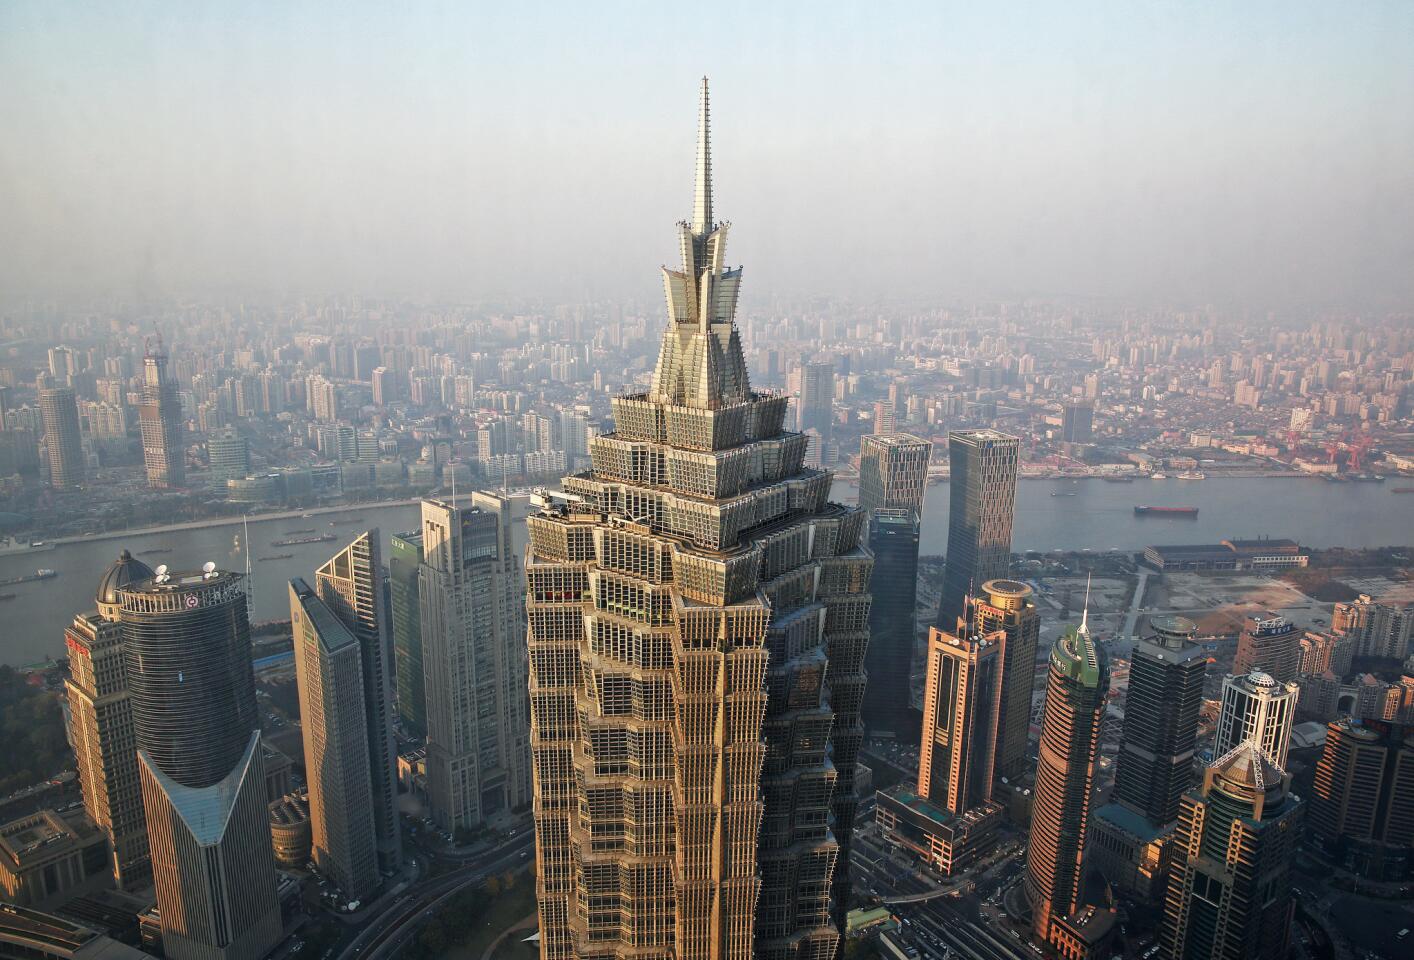 Shanghai boasts three towers on this list. The Jin Mao Tower features retail and office space and hosts the Grand Hyatt Shanghai on floors 53 to 87. The building also boasts the world’s longest laundry chute.